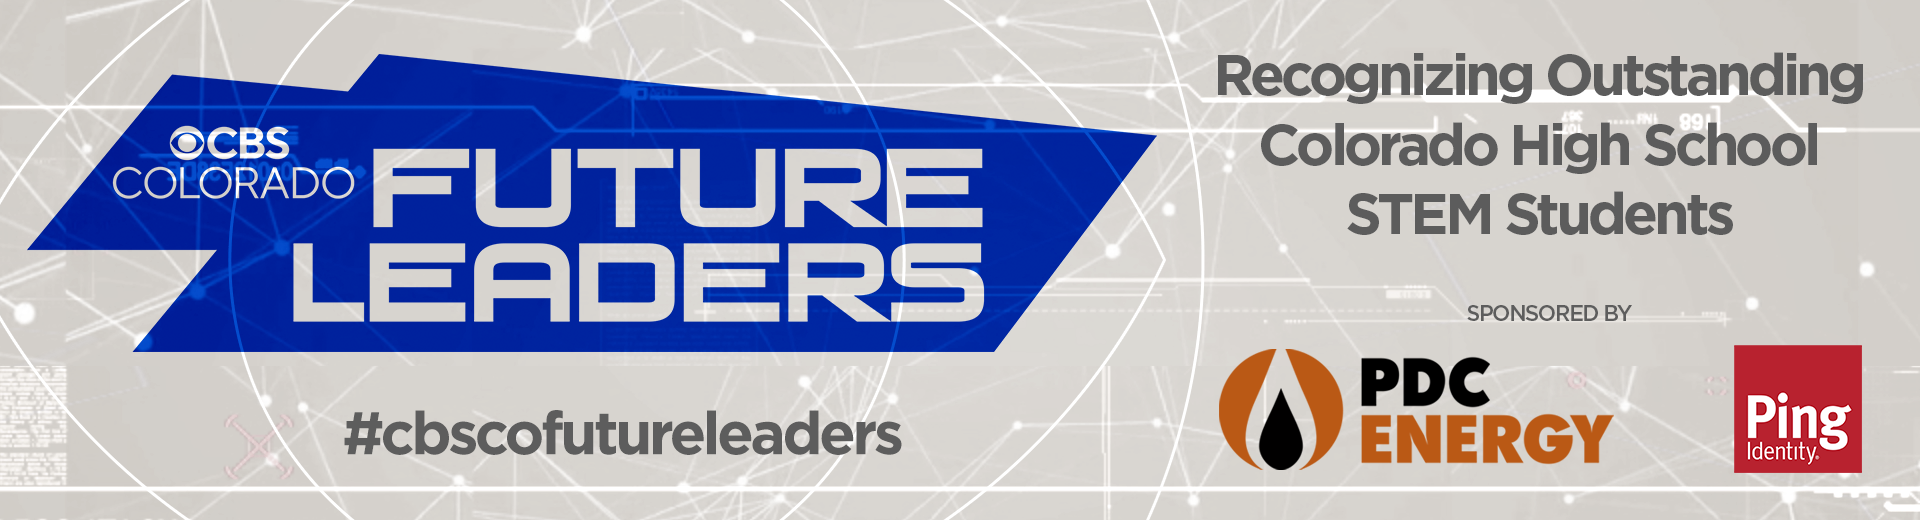 future-leaders-header-info-2023-copy.png 